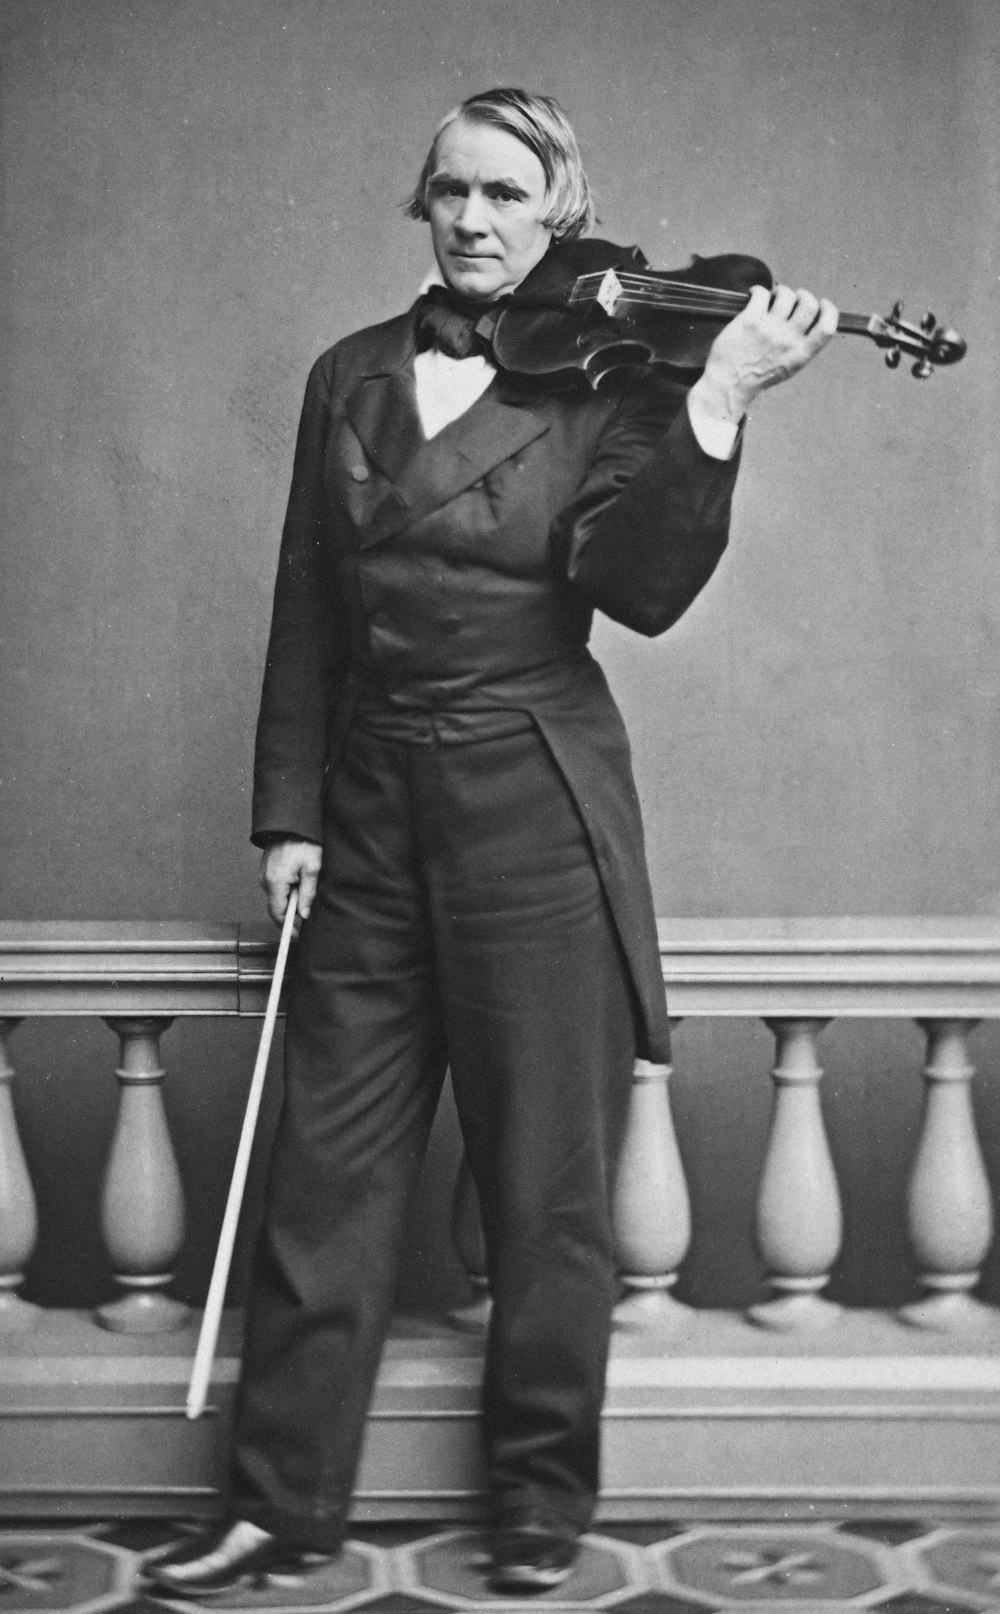 an old photo of a man holding a violin